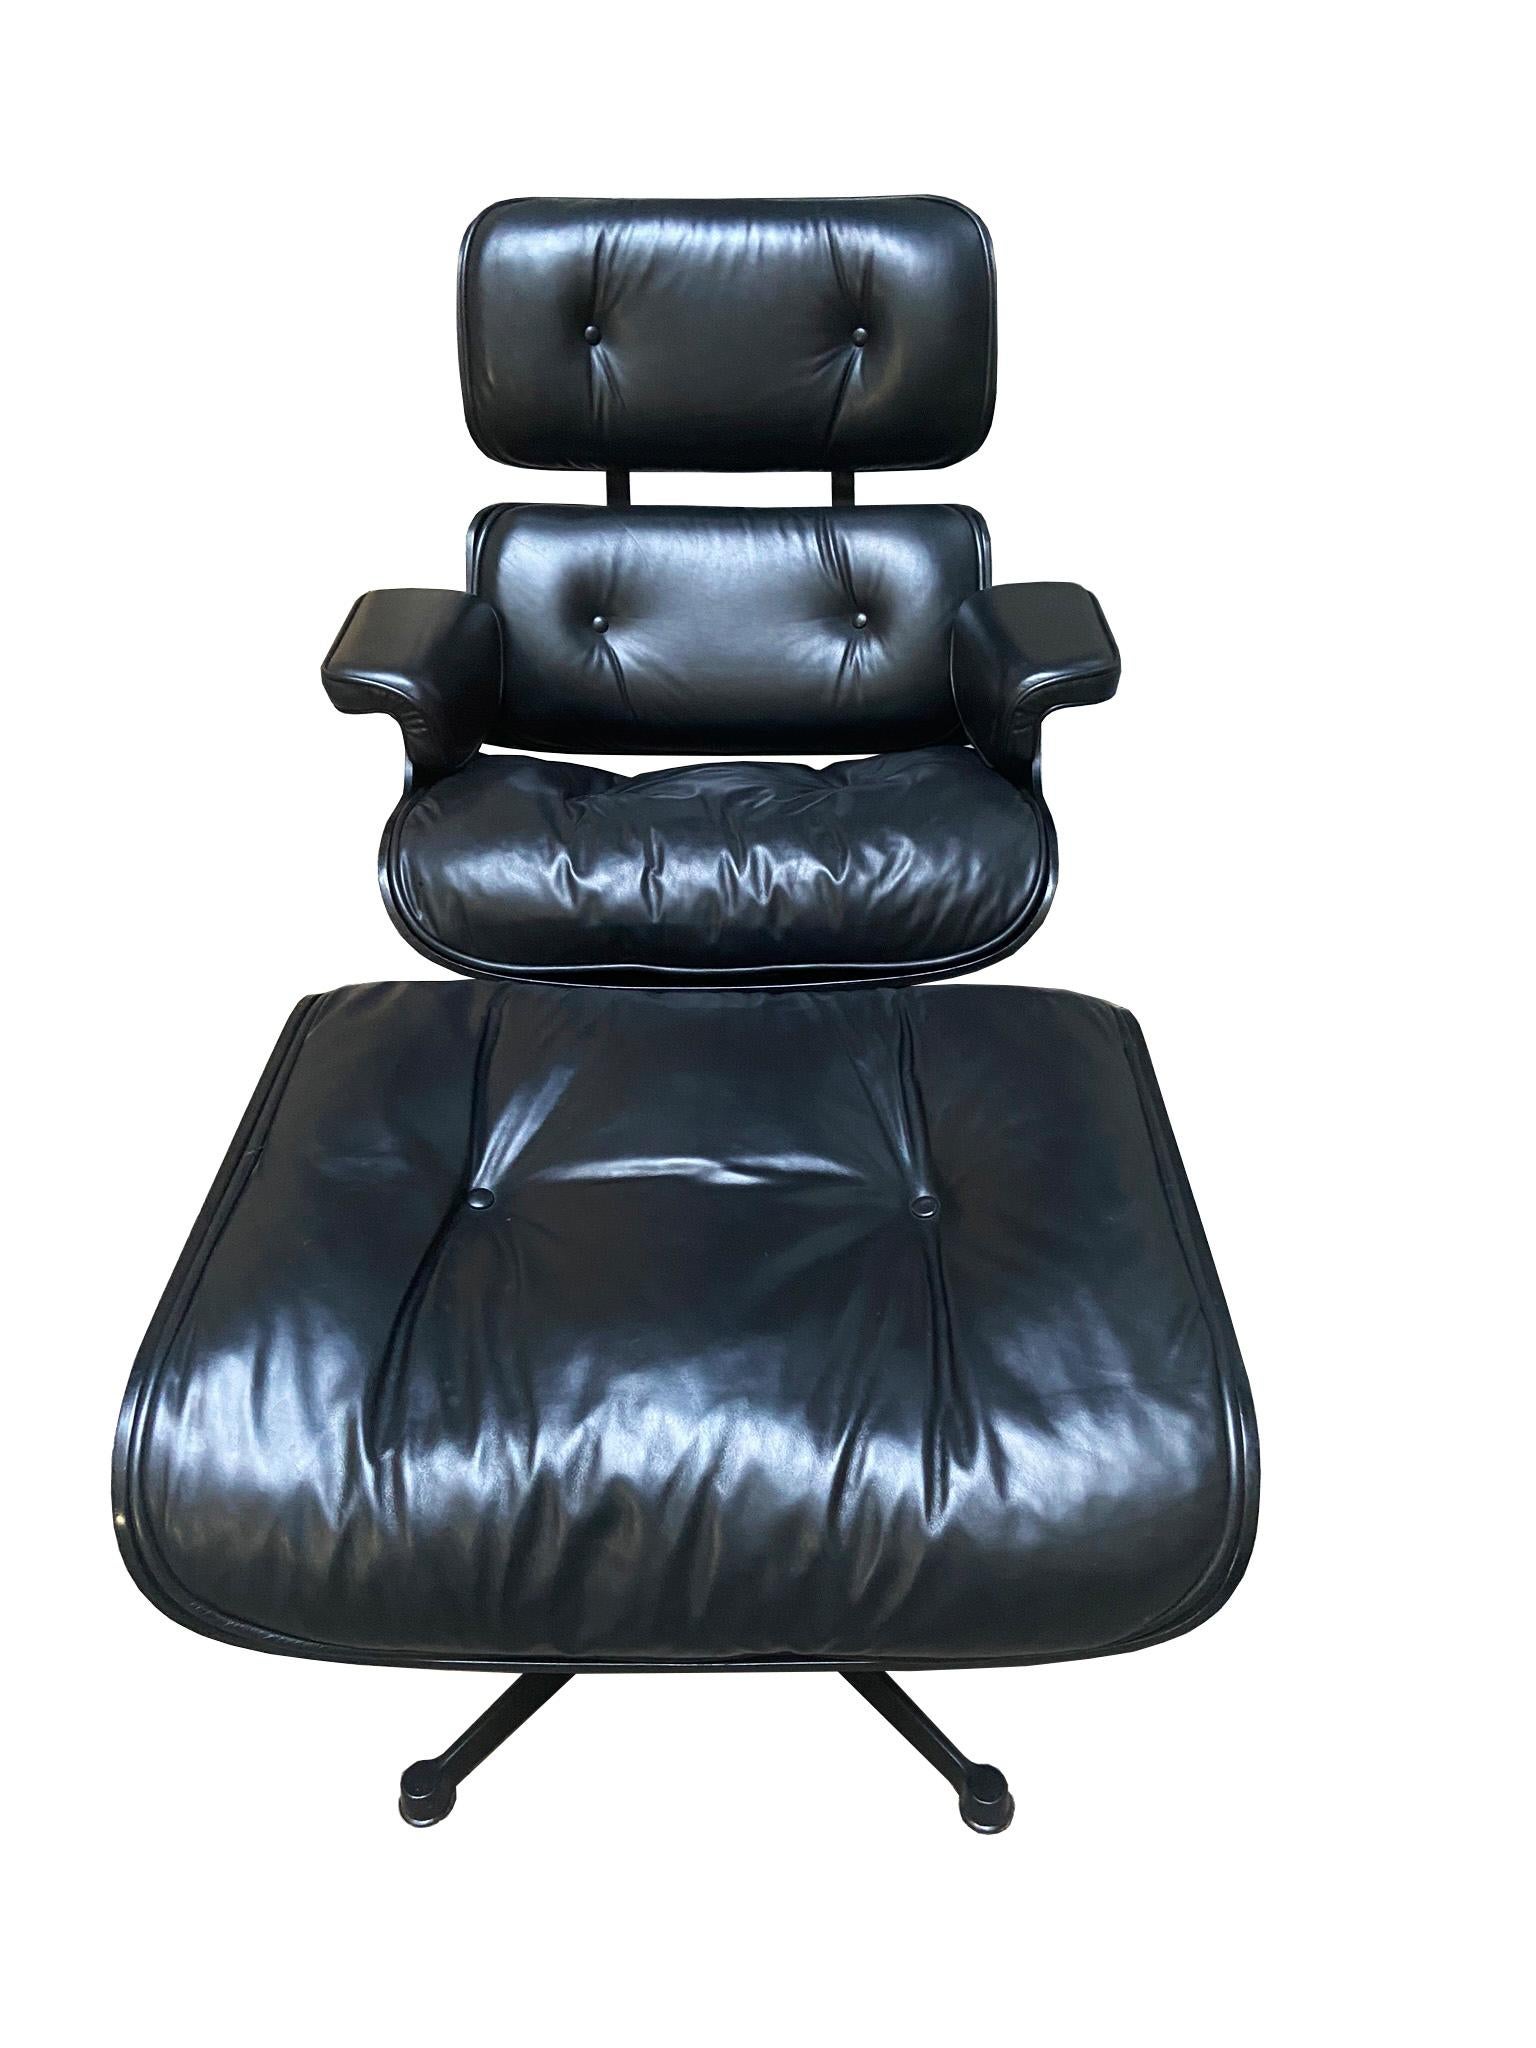 1970s Eames 670 Lounge Chair and 671 Ottoman Black Leather Herman Miller by ICF 3